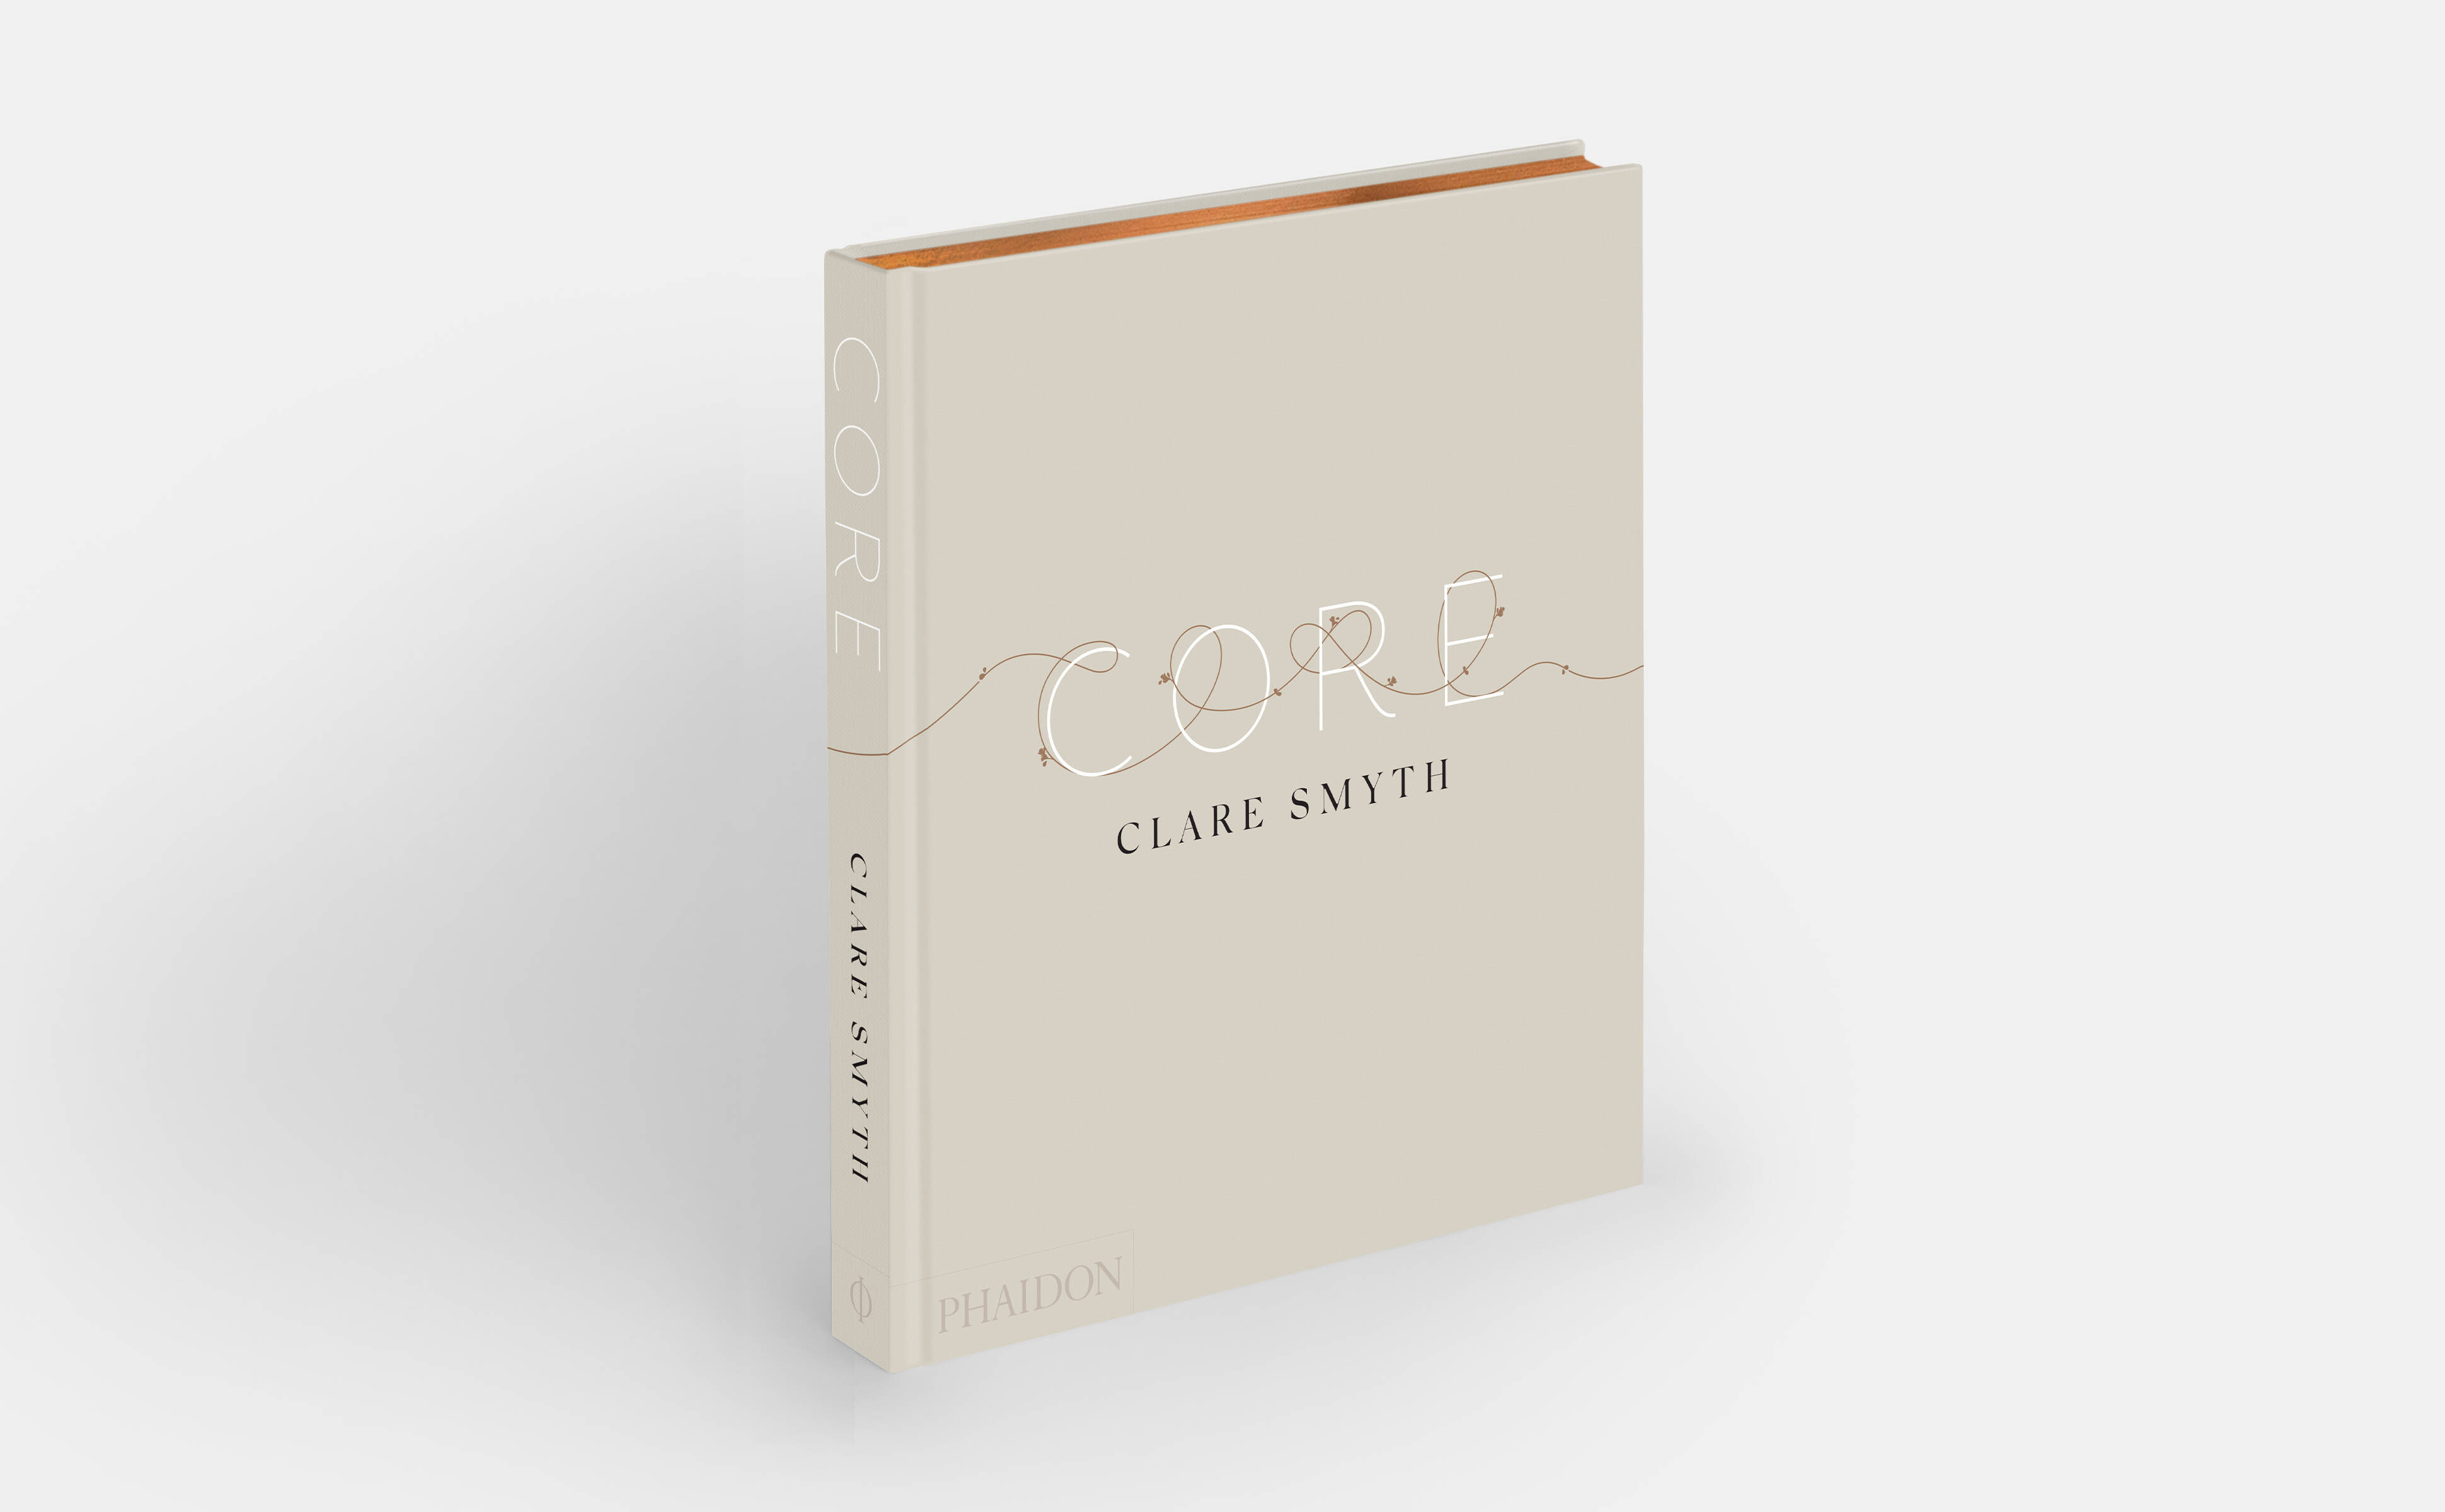 How Core’s Clare Smyth gives her diners a taste of London